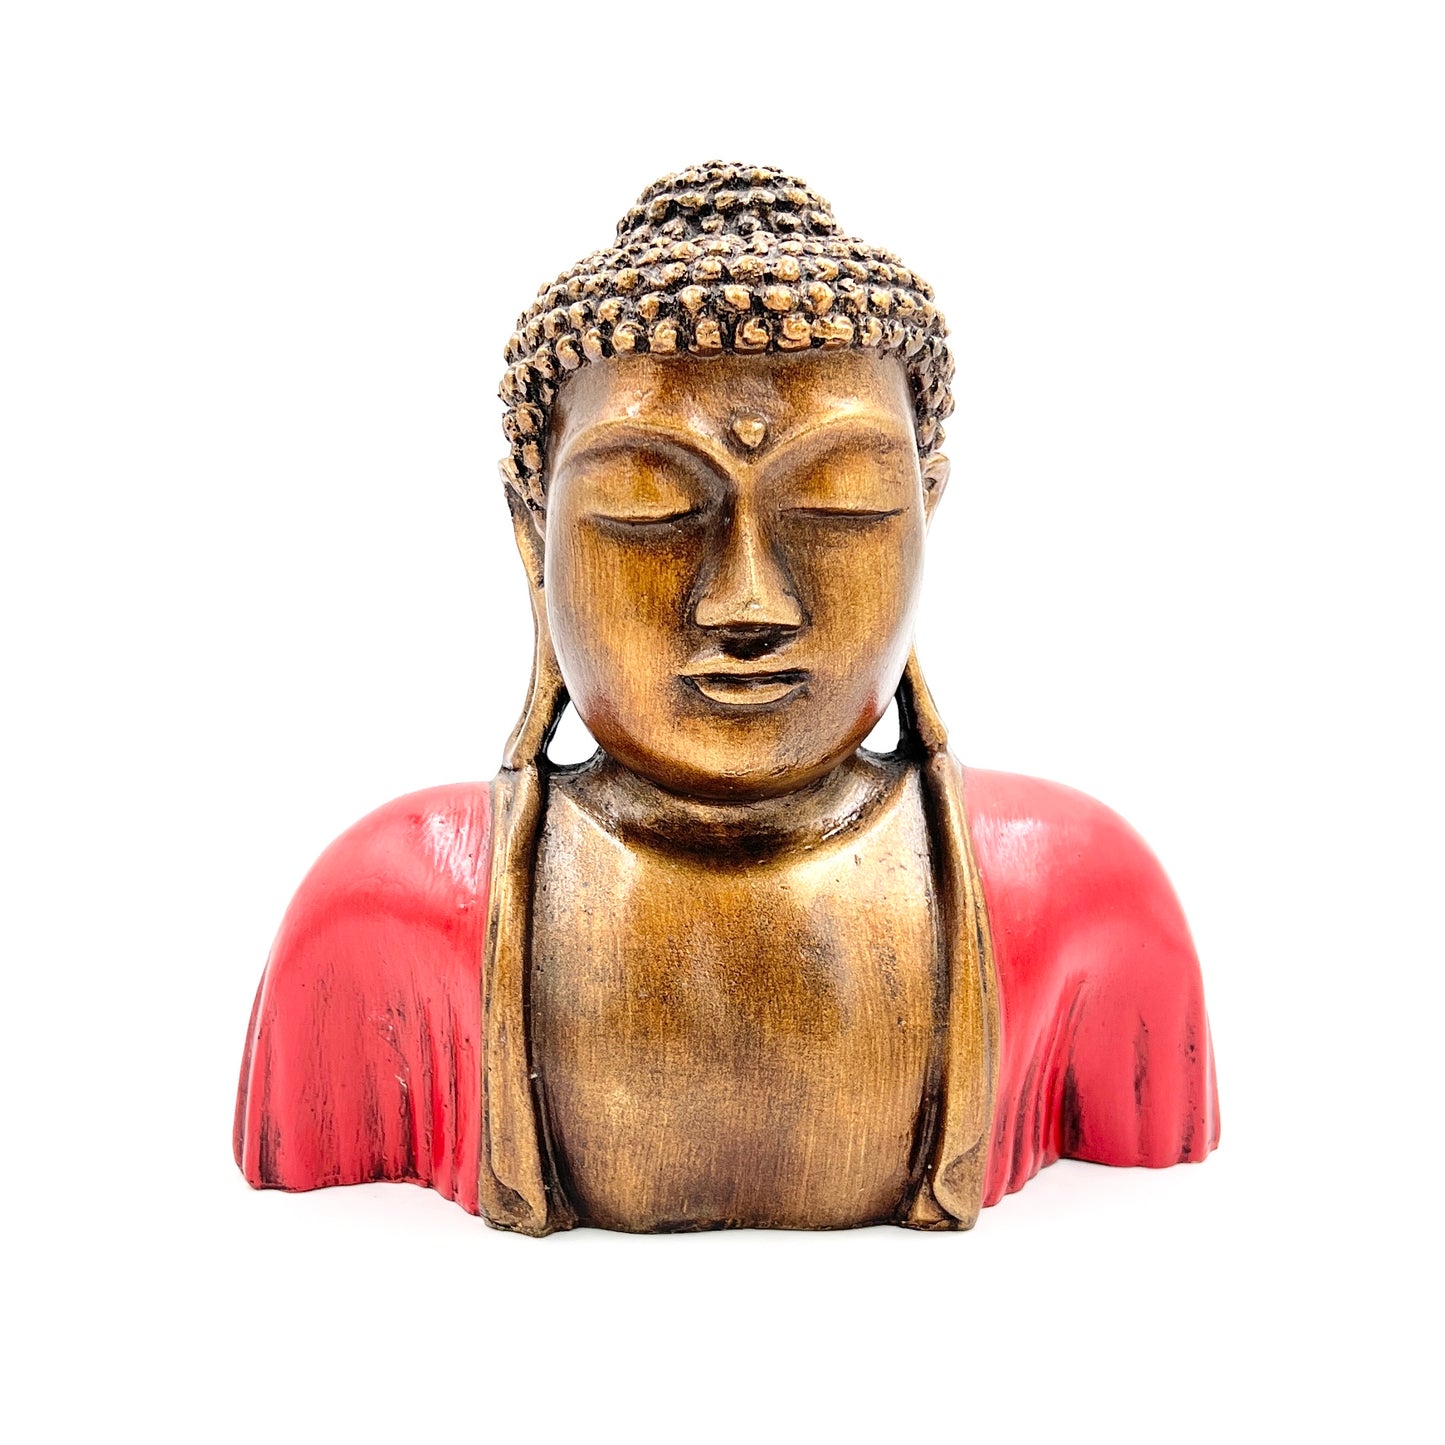 Hand Painted Resin Buddha Bust